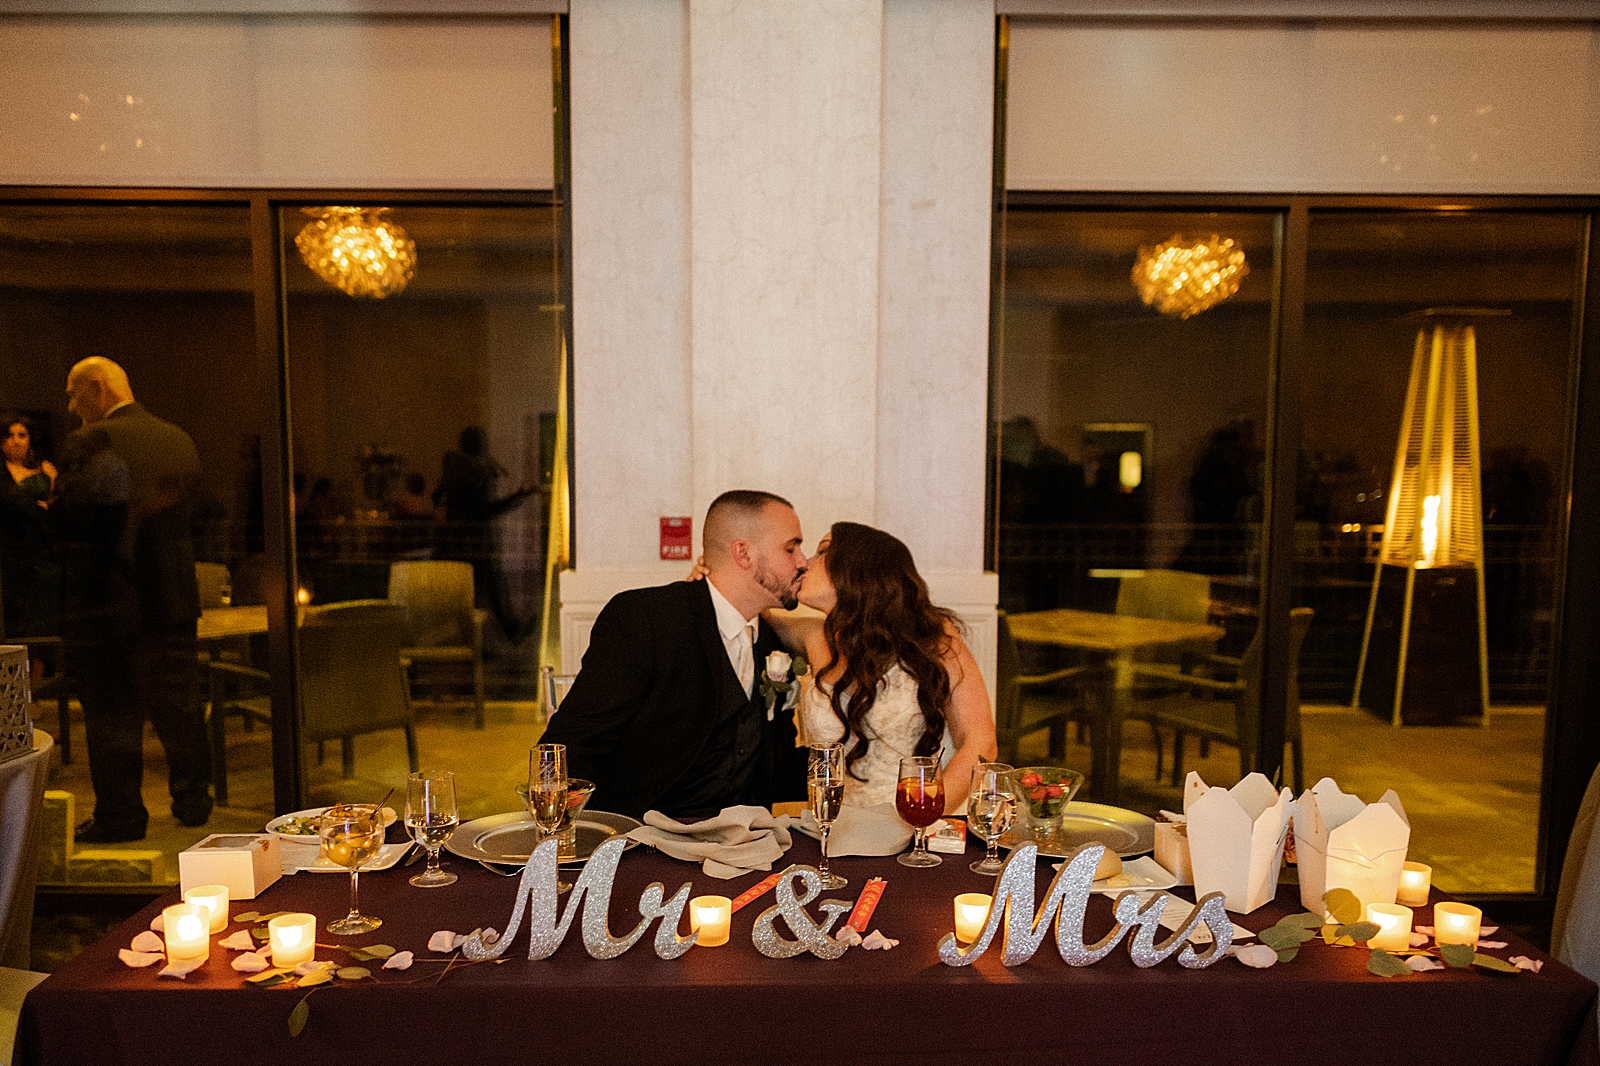 Bride and Groom kissing at sweetheart table